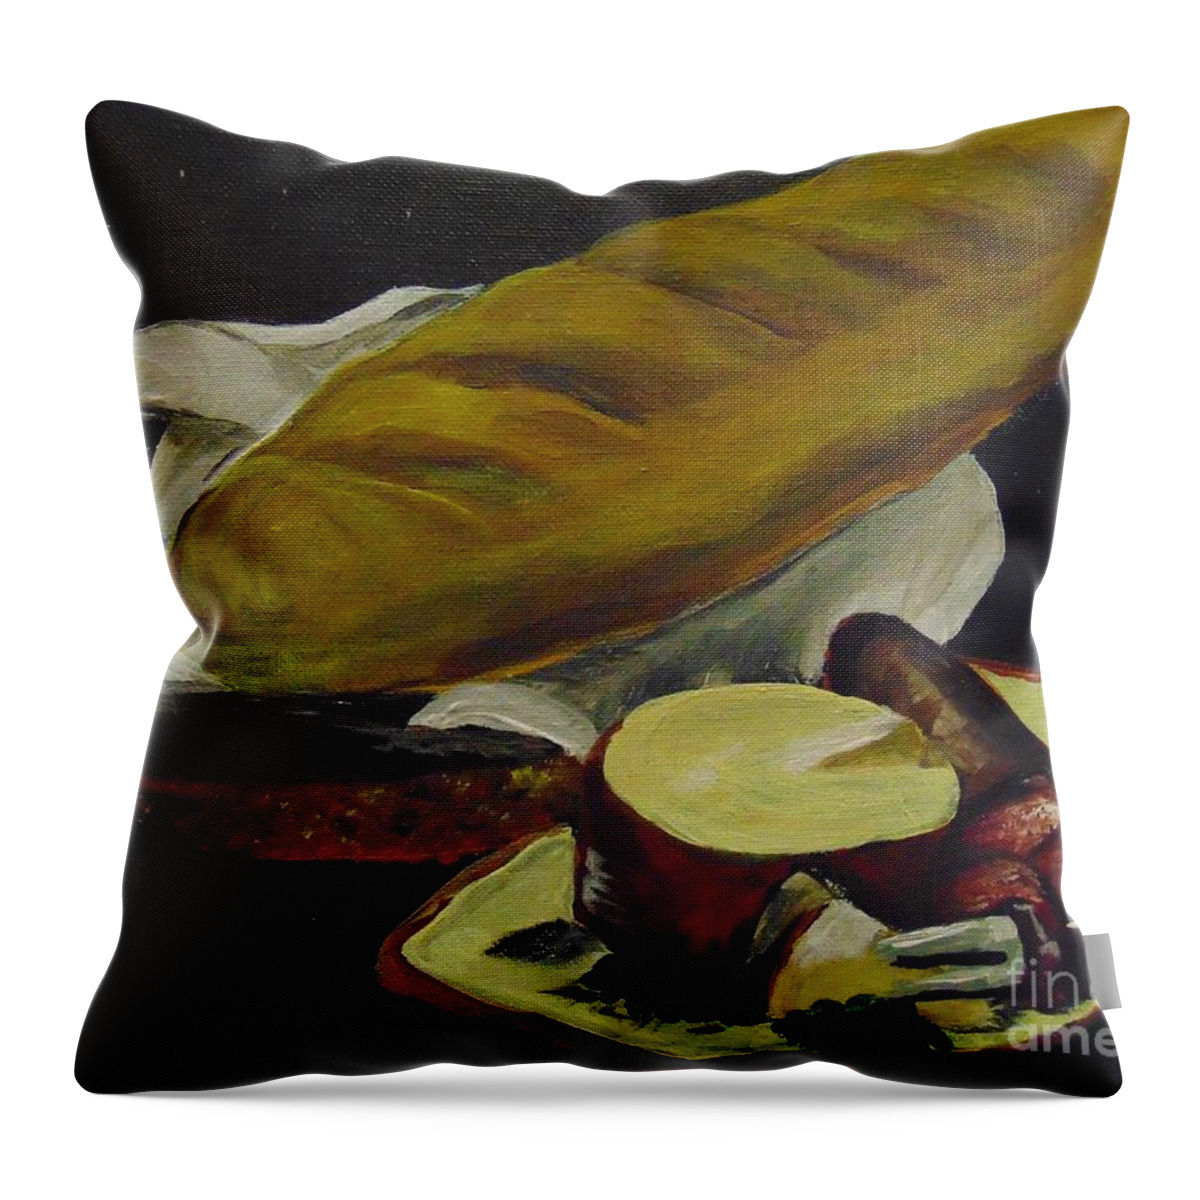 Bread Throw Pillow featuring the painting Life by Saundra Johnson